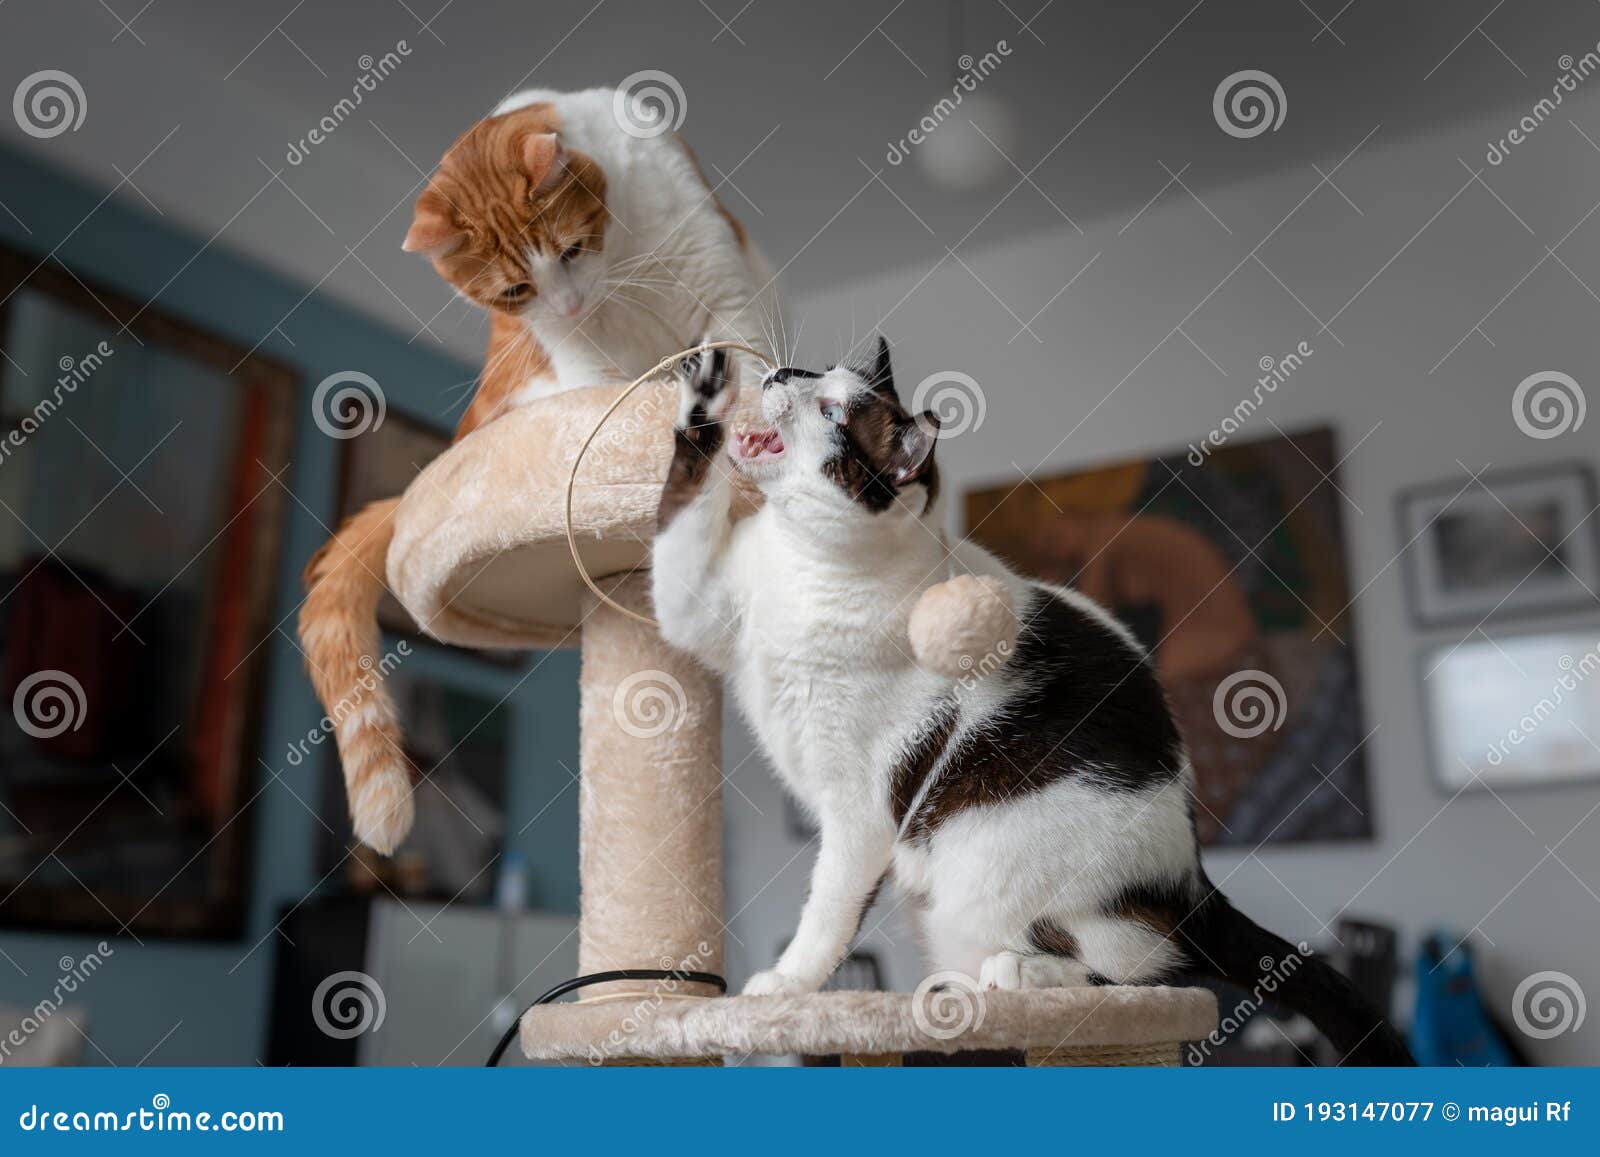 two domestic cats play in a scratching tower 2